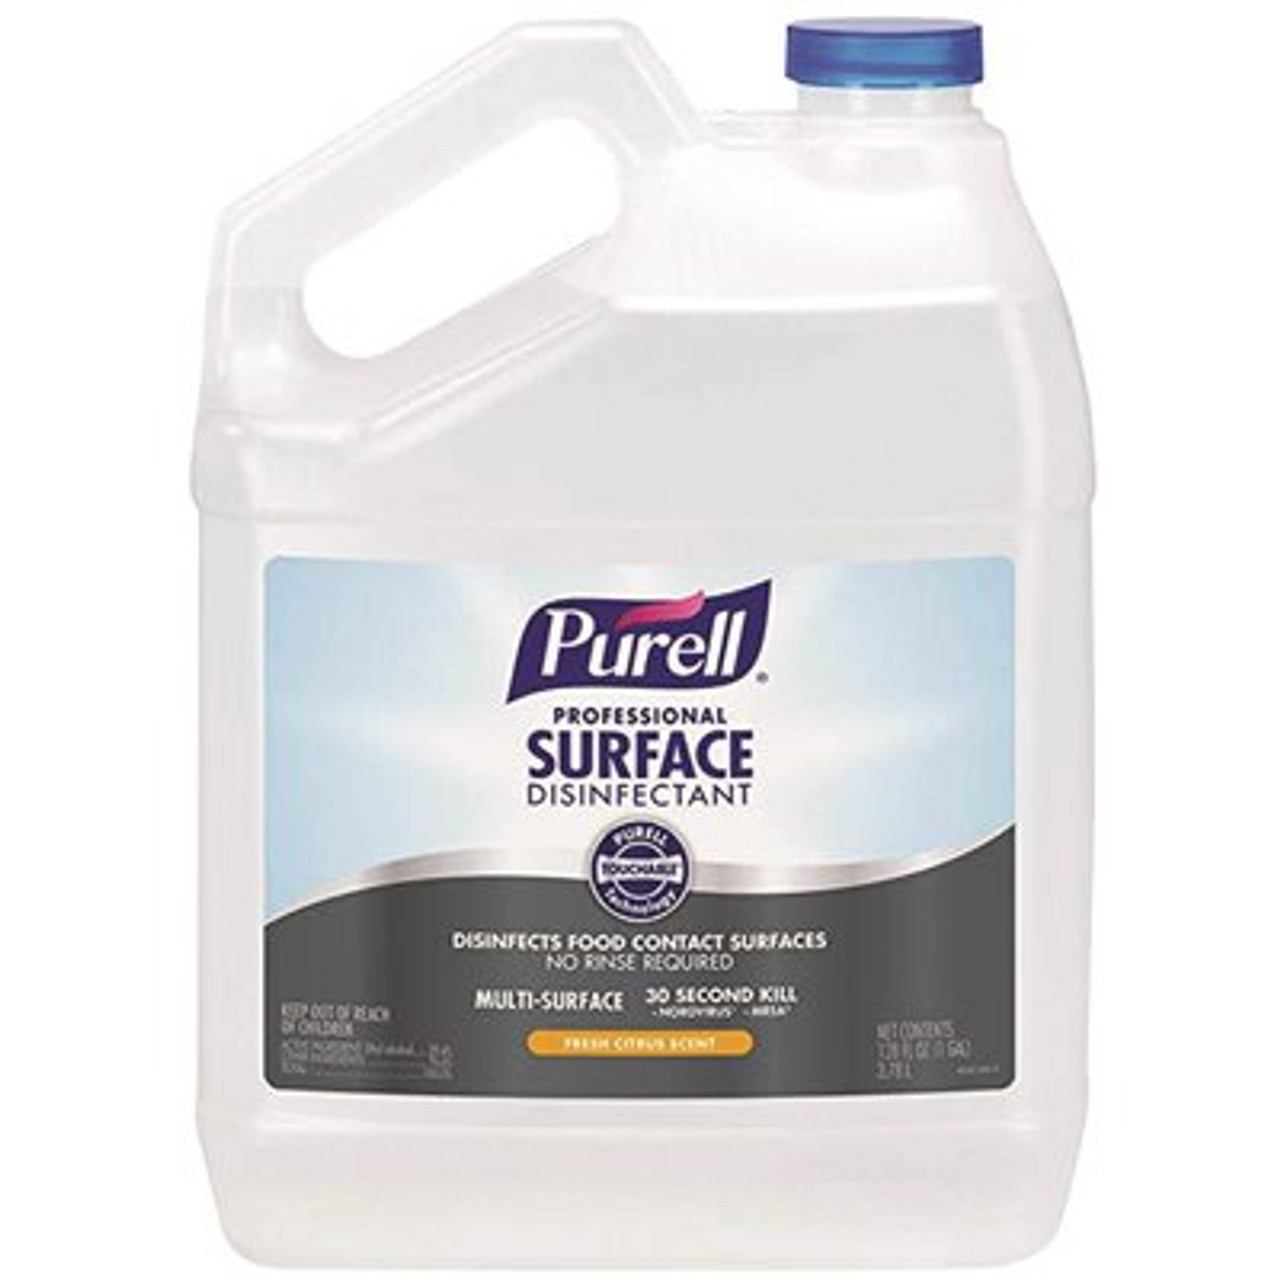 PURELL Gal. Surface Disinfectant Pour Bottle Refill Professional Surface Disinfectant, Citrus Scent (4-Pack Per Case)